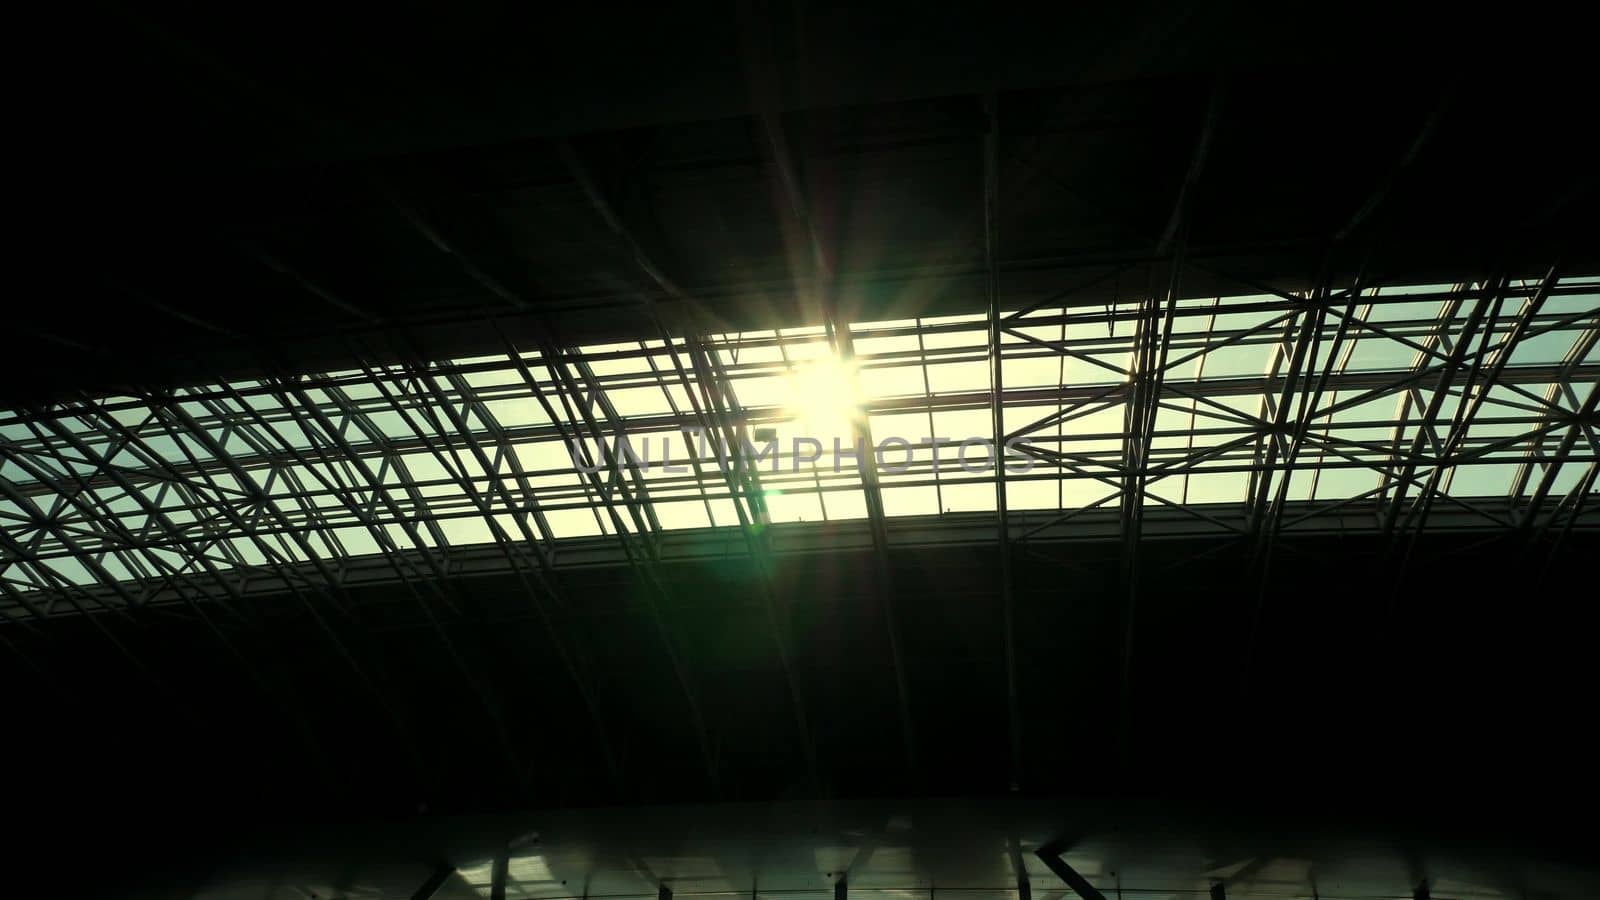 the sun shines through the roof of the airport pavilion by djtreneryay